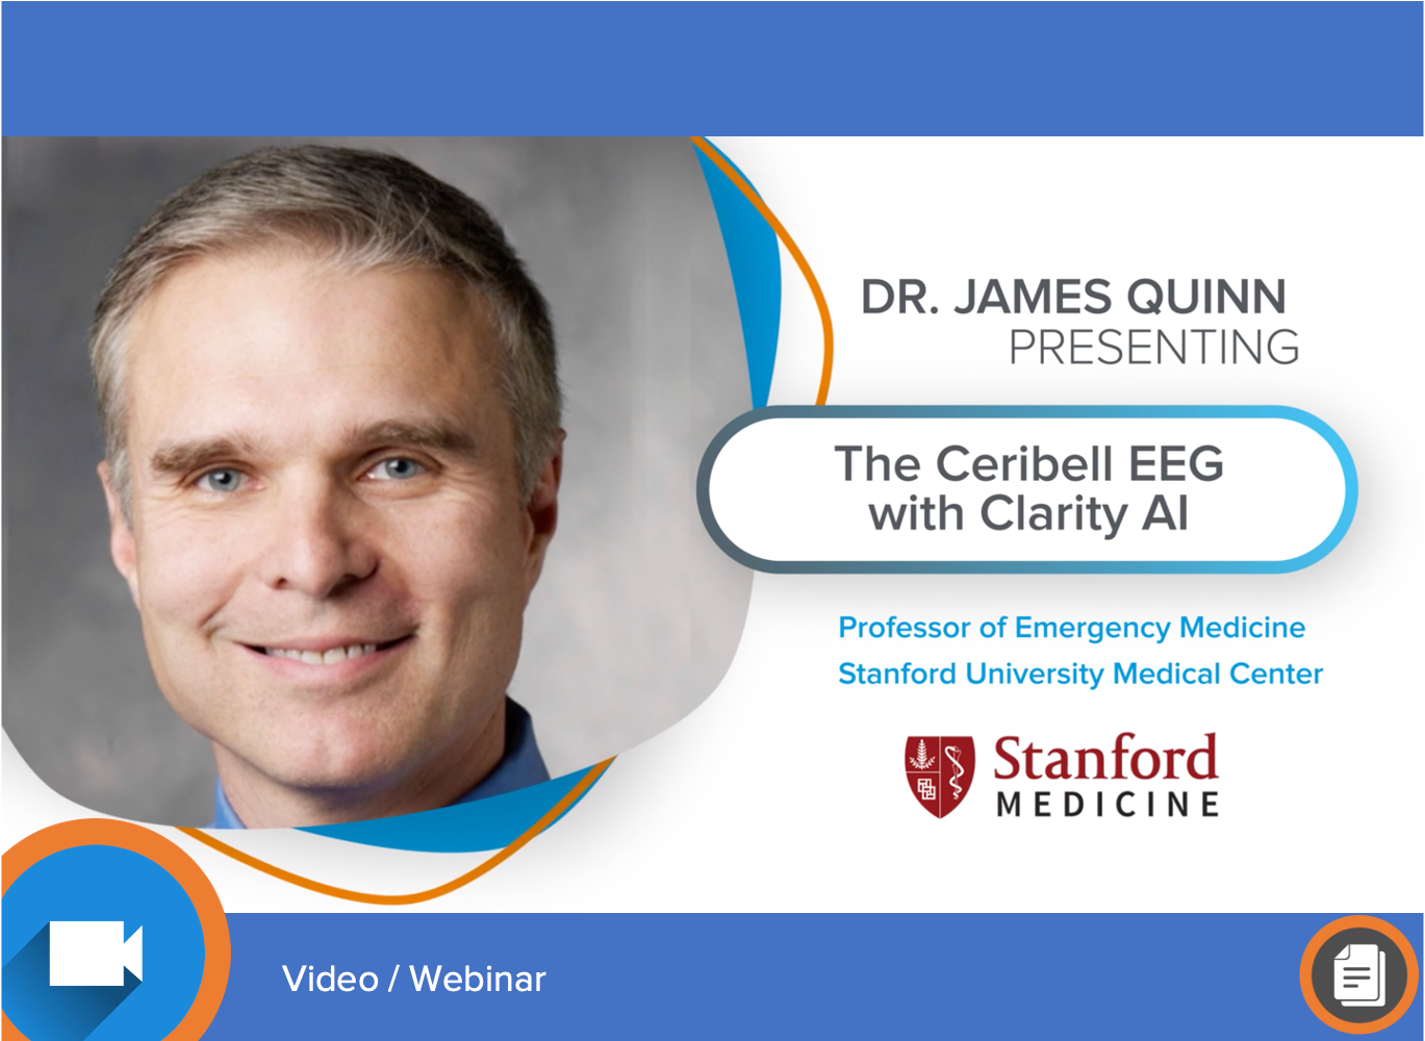 Clarity AI For 24/7 EEG Monitoring Alert - Manuscript Review With Dr. James Quinn